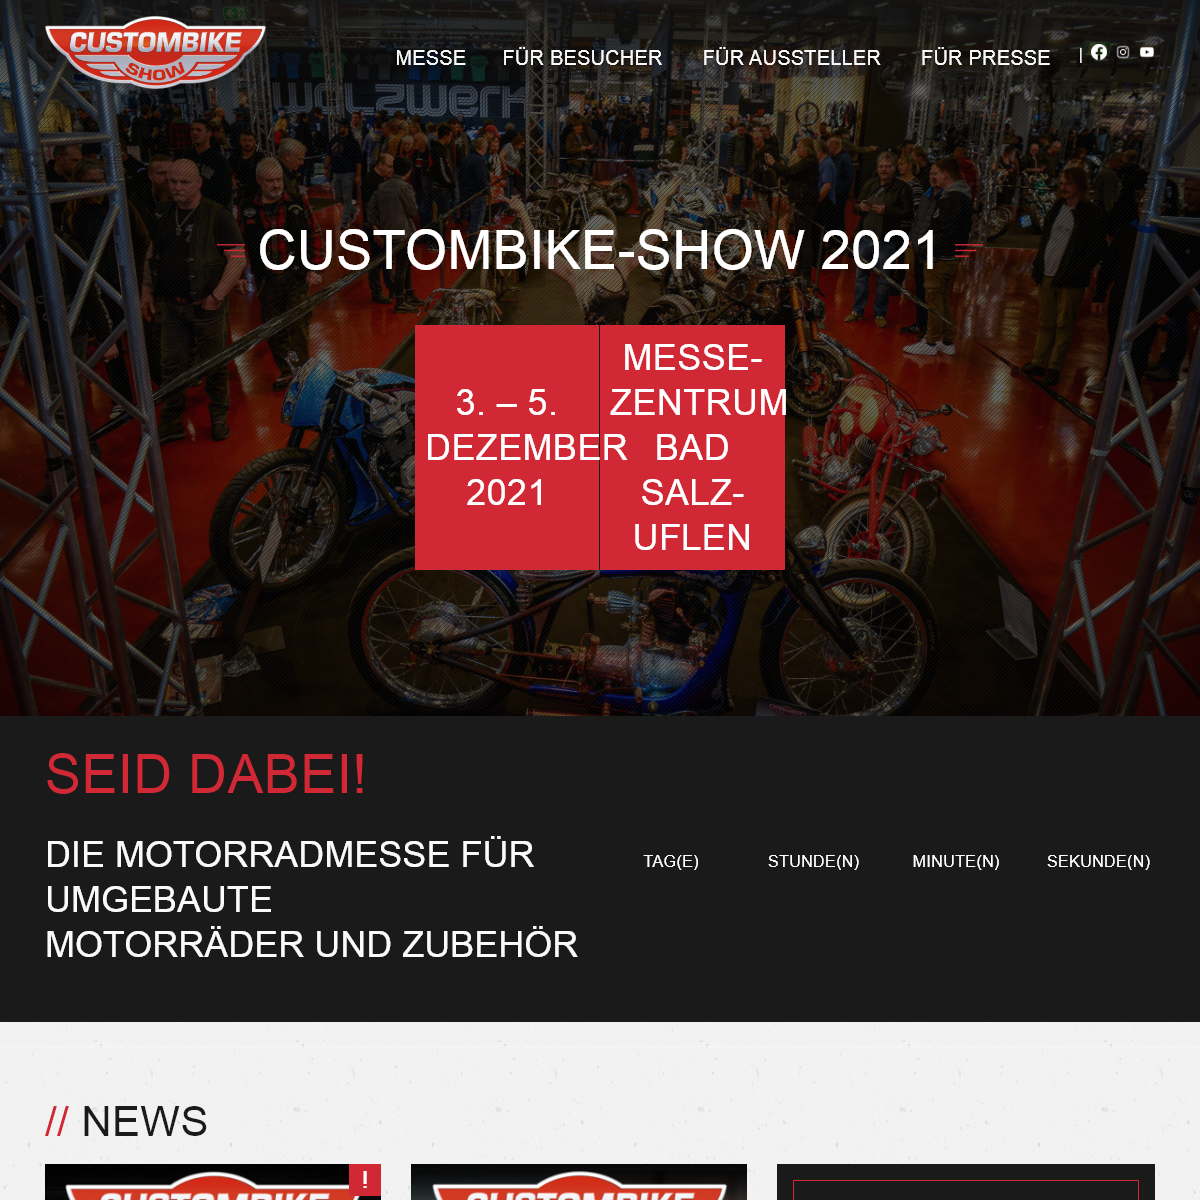 A complete backup of custombike-show.de